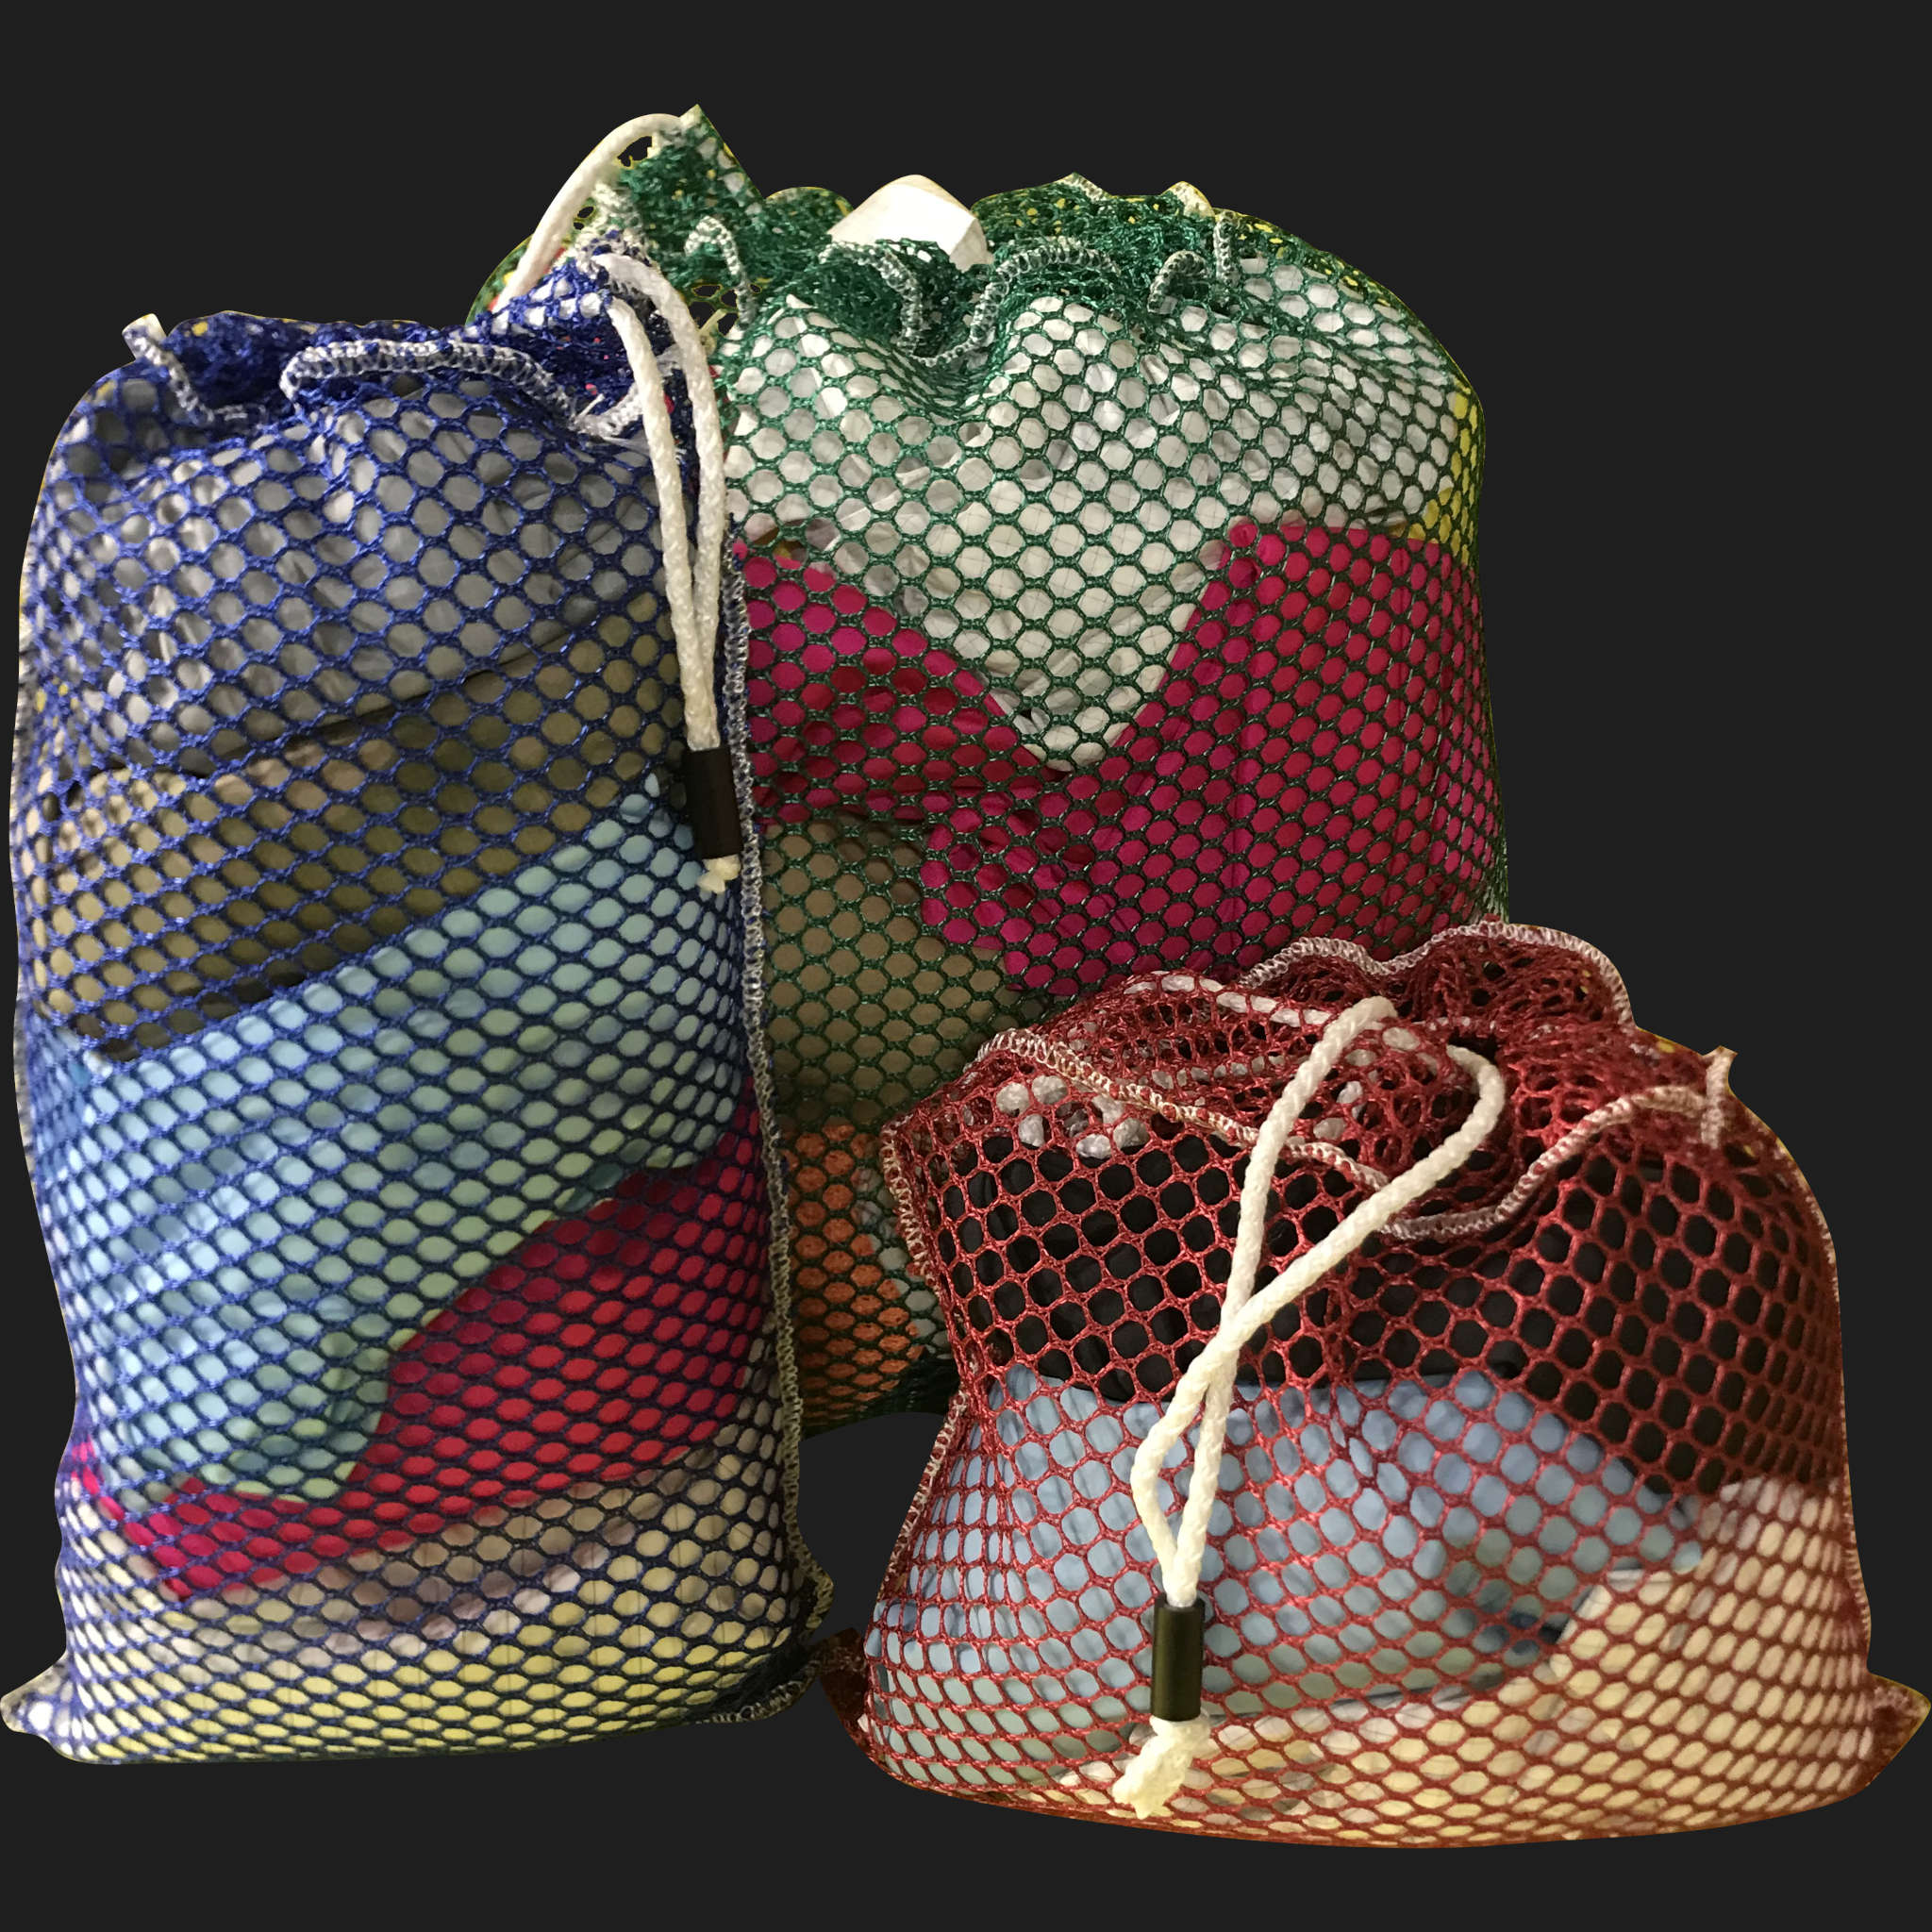 42" x 62" Customized Mesh-Net-Laundry Bags Heavy Duty with Cord and barrellock closure